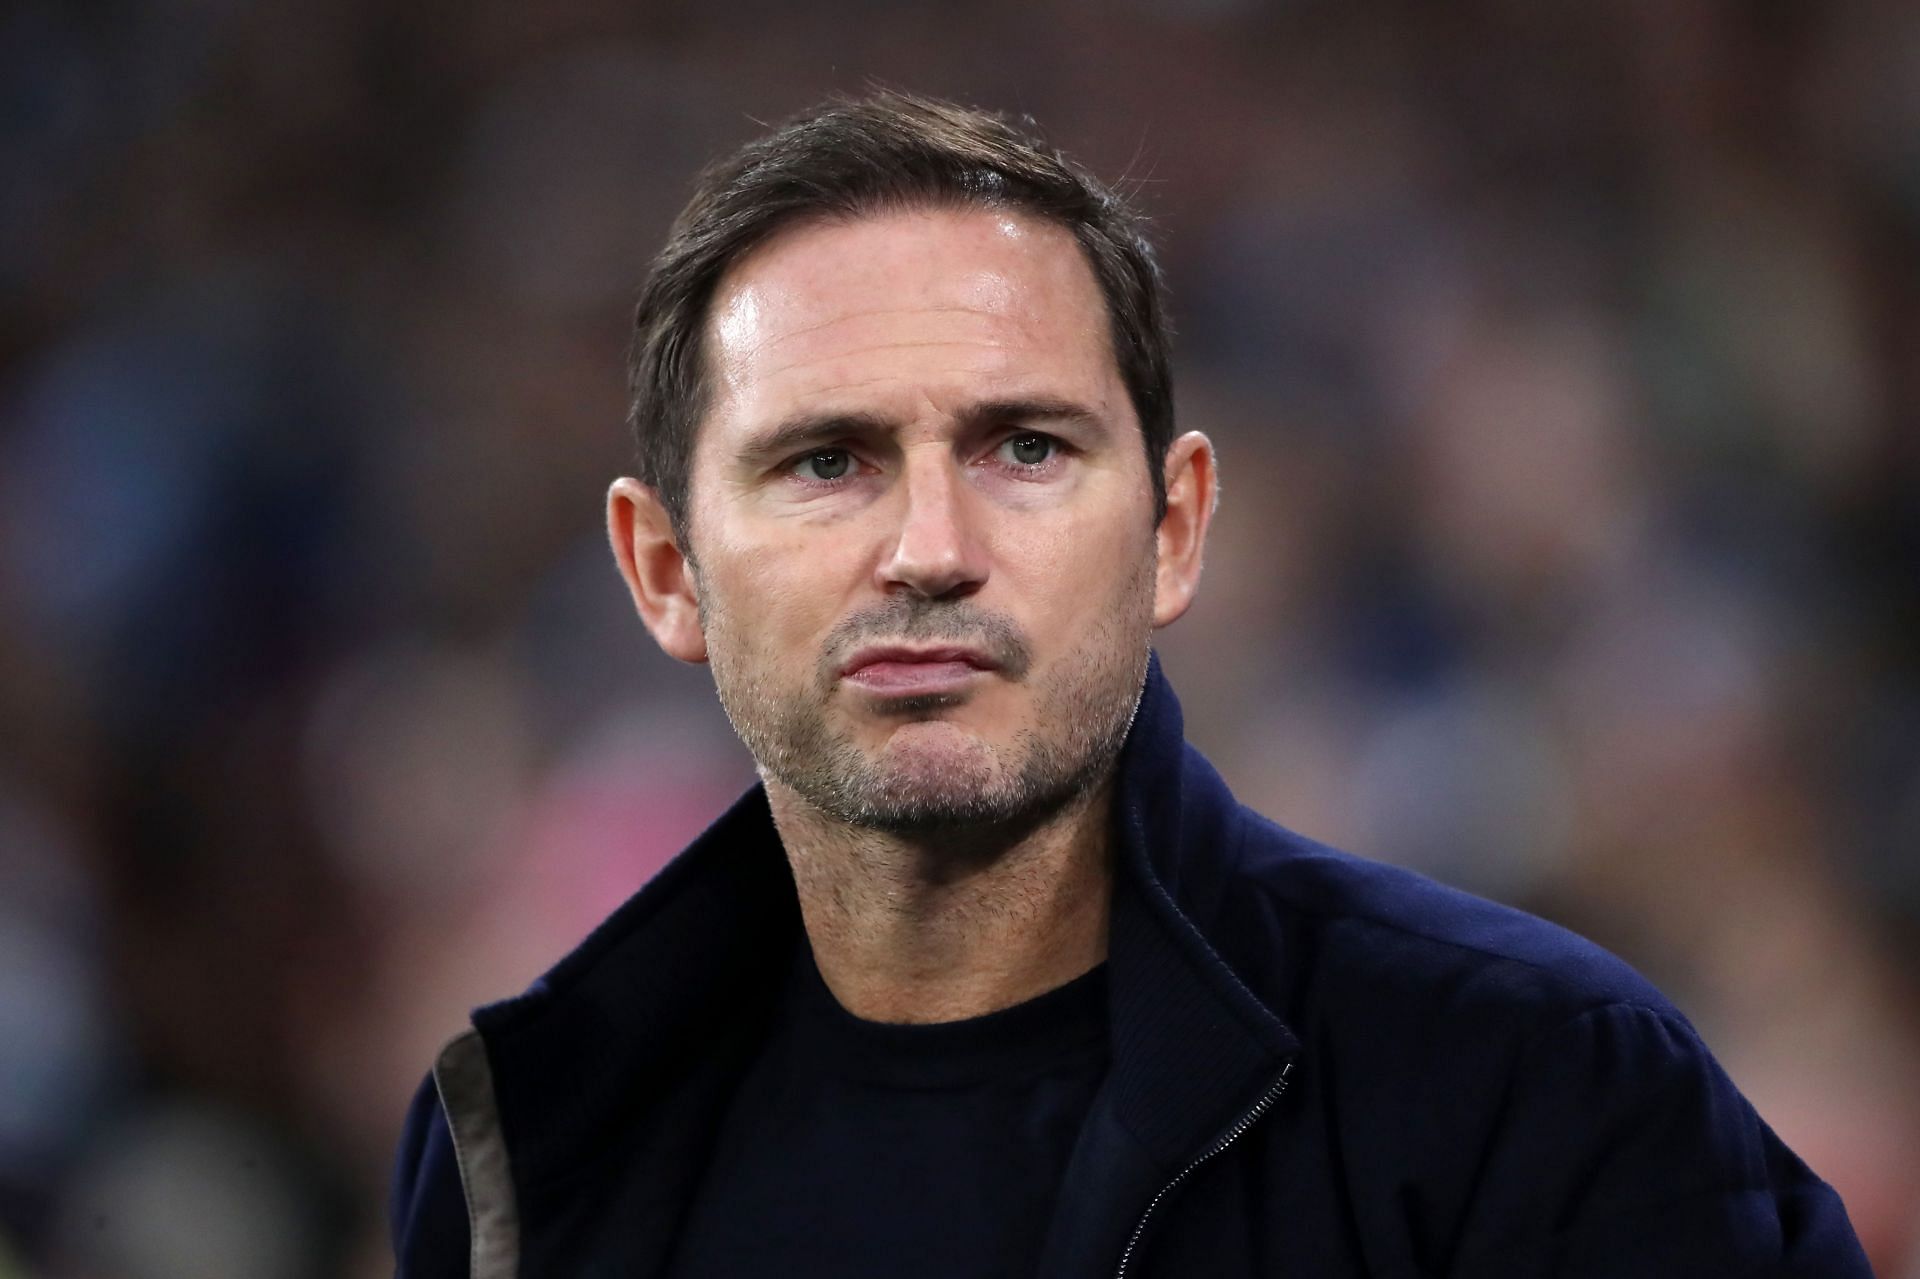 Frank Lampard comments on his sacking.